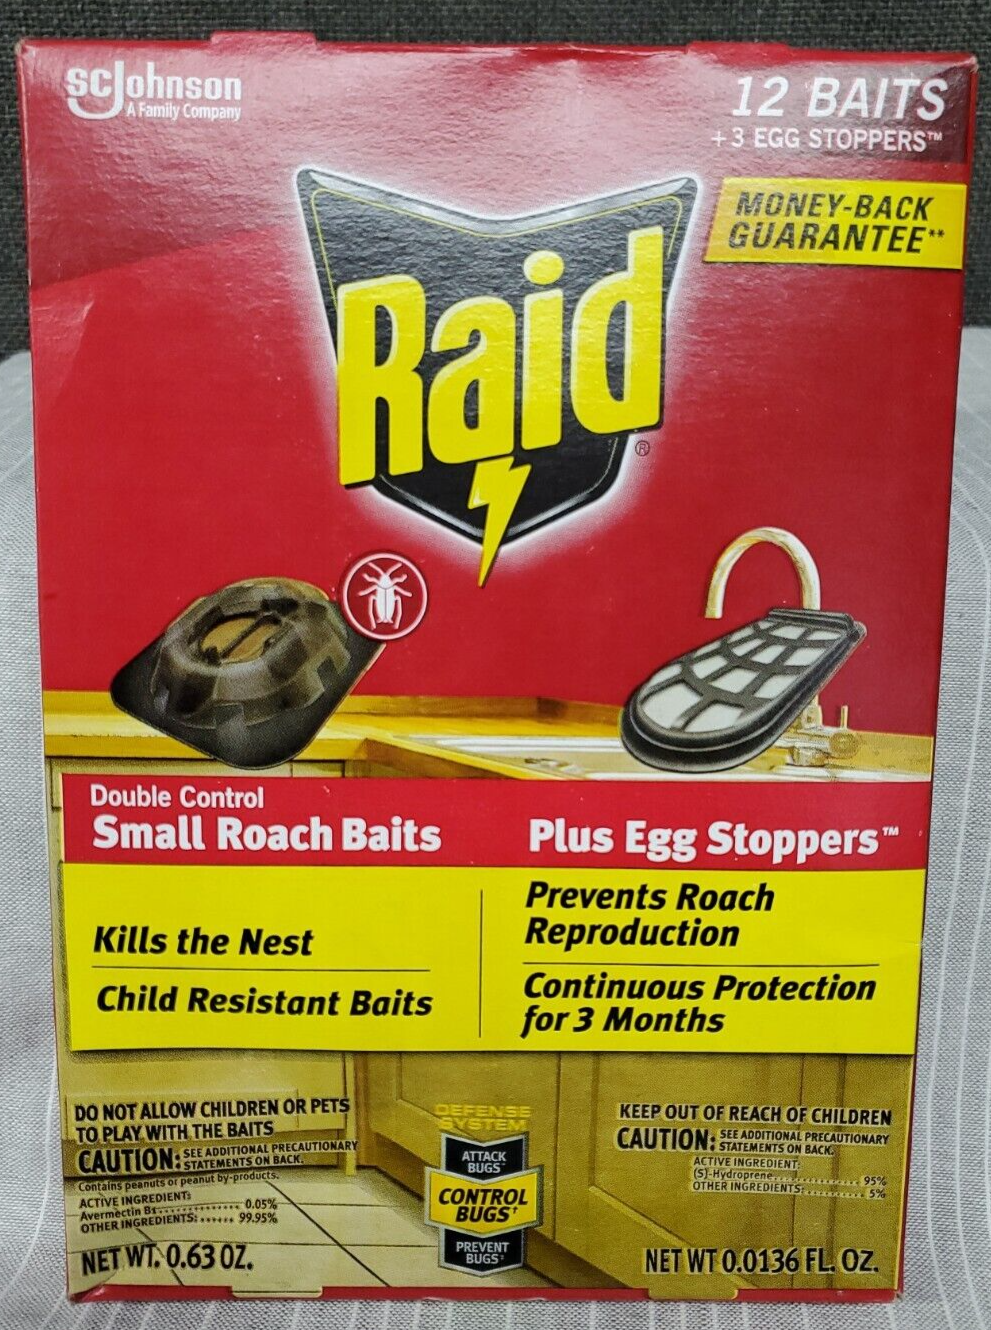 https://bndtreasurechest.com/wp-content/uploads/imported/6/06/Raid-Double-Control-12-ct-Small-Roach-Baits-3-Egg-Stoppers-NEW-266238160706.png